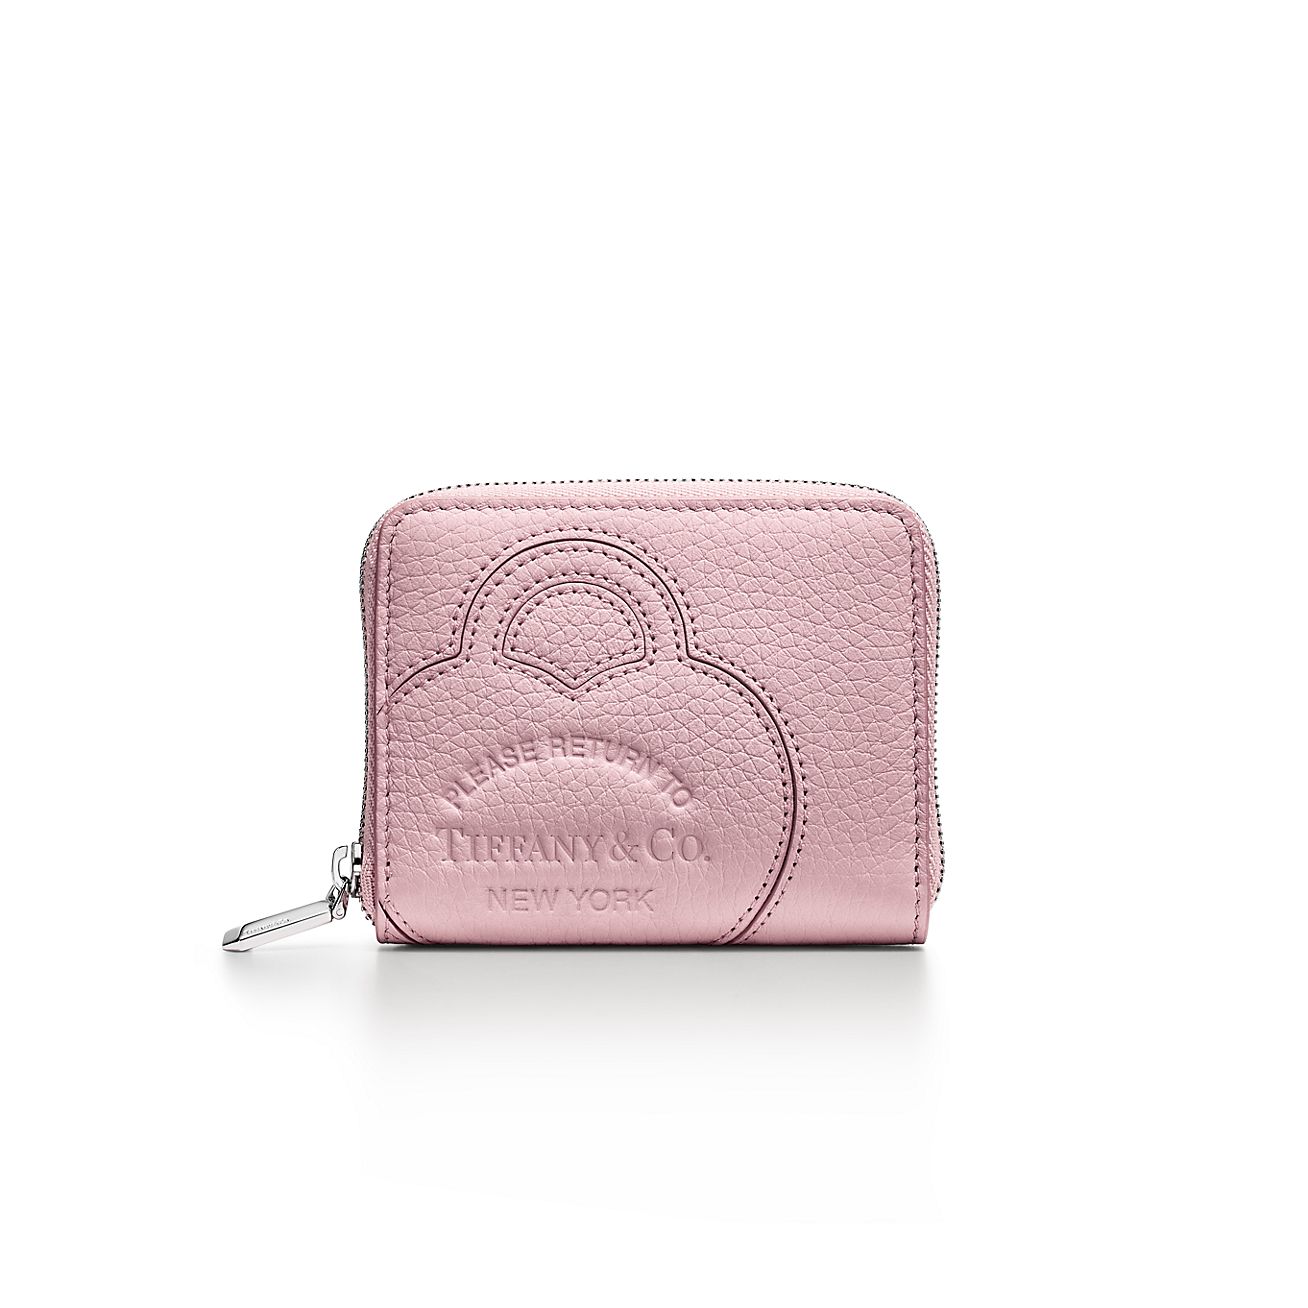 Return to Tiffany® Small Zip Wallet in Crystal Pink Leather | Tiffany & Co.